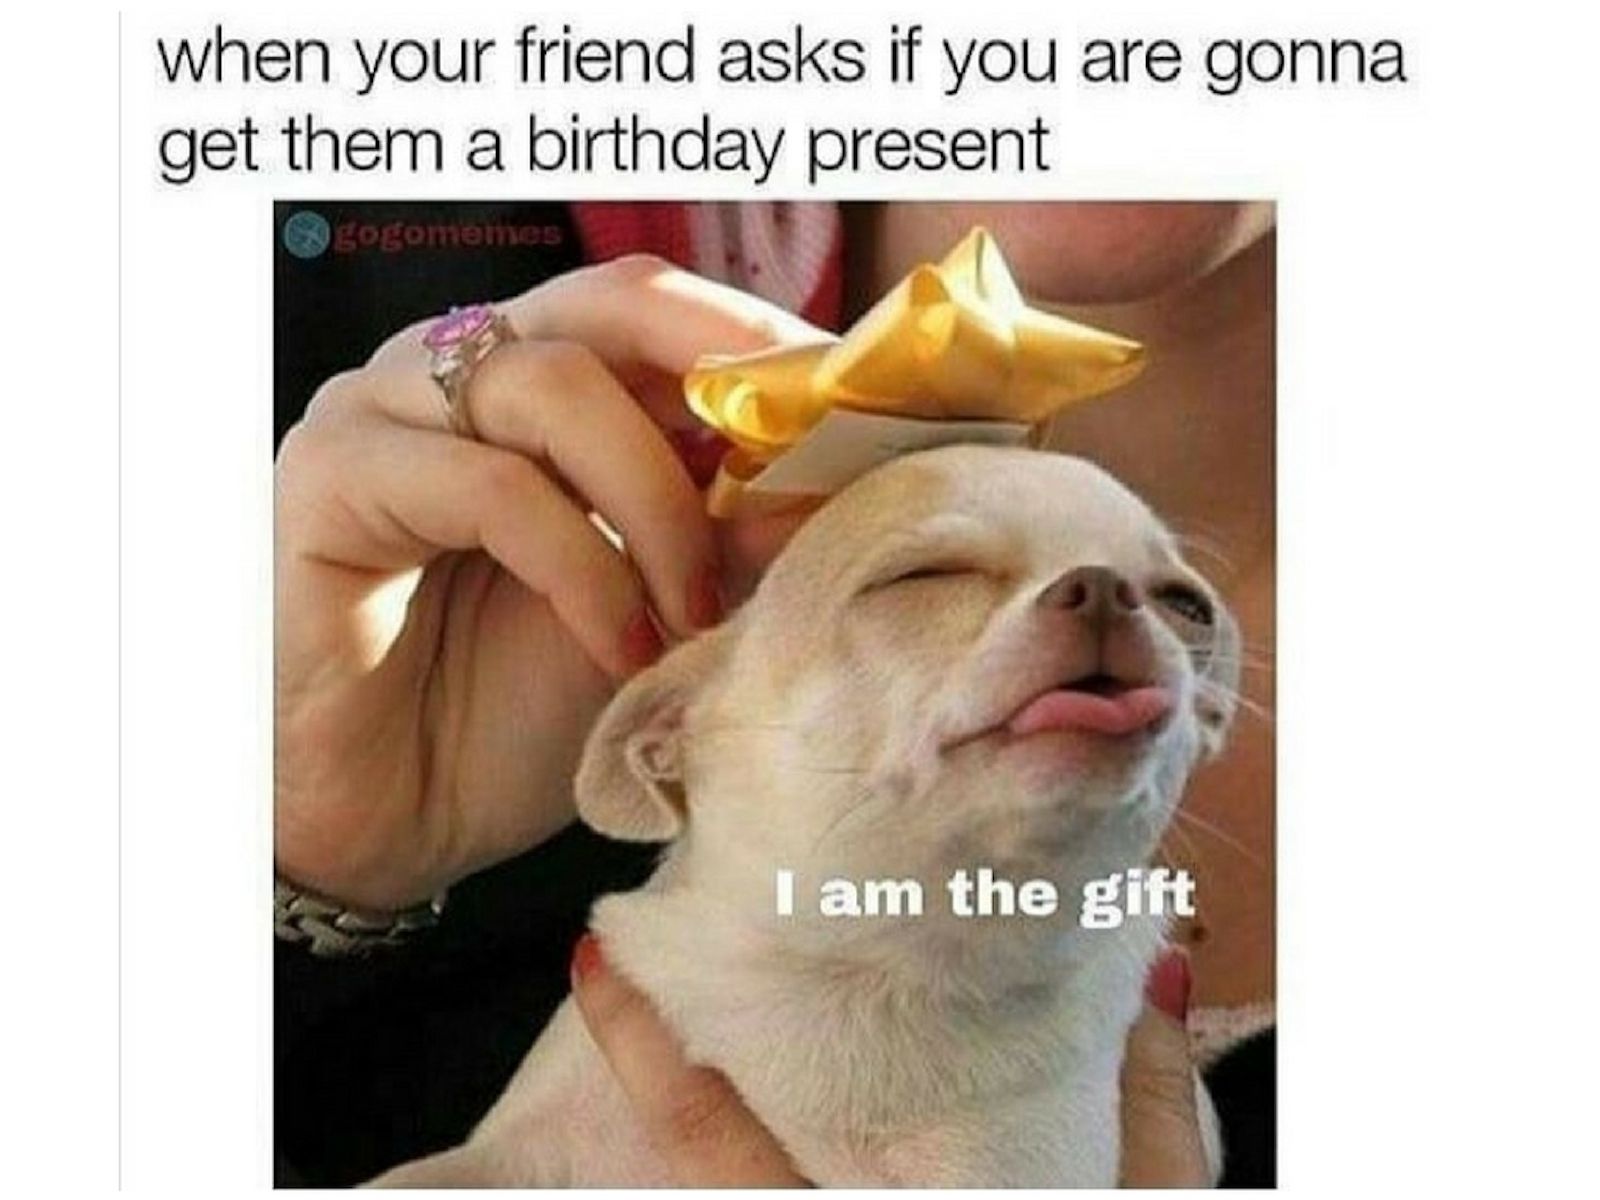 I'm your gift